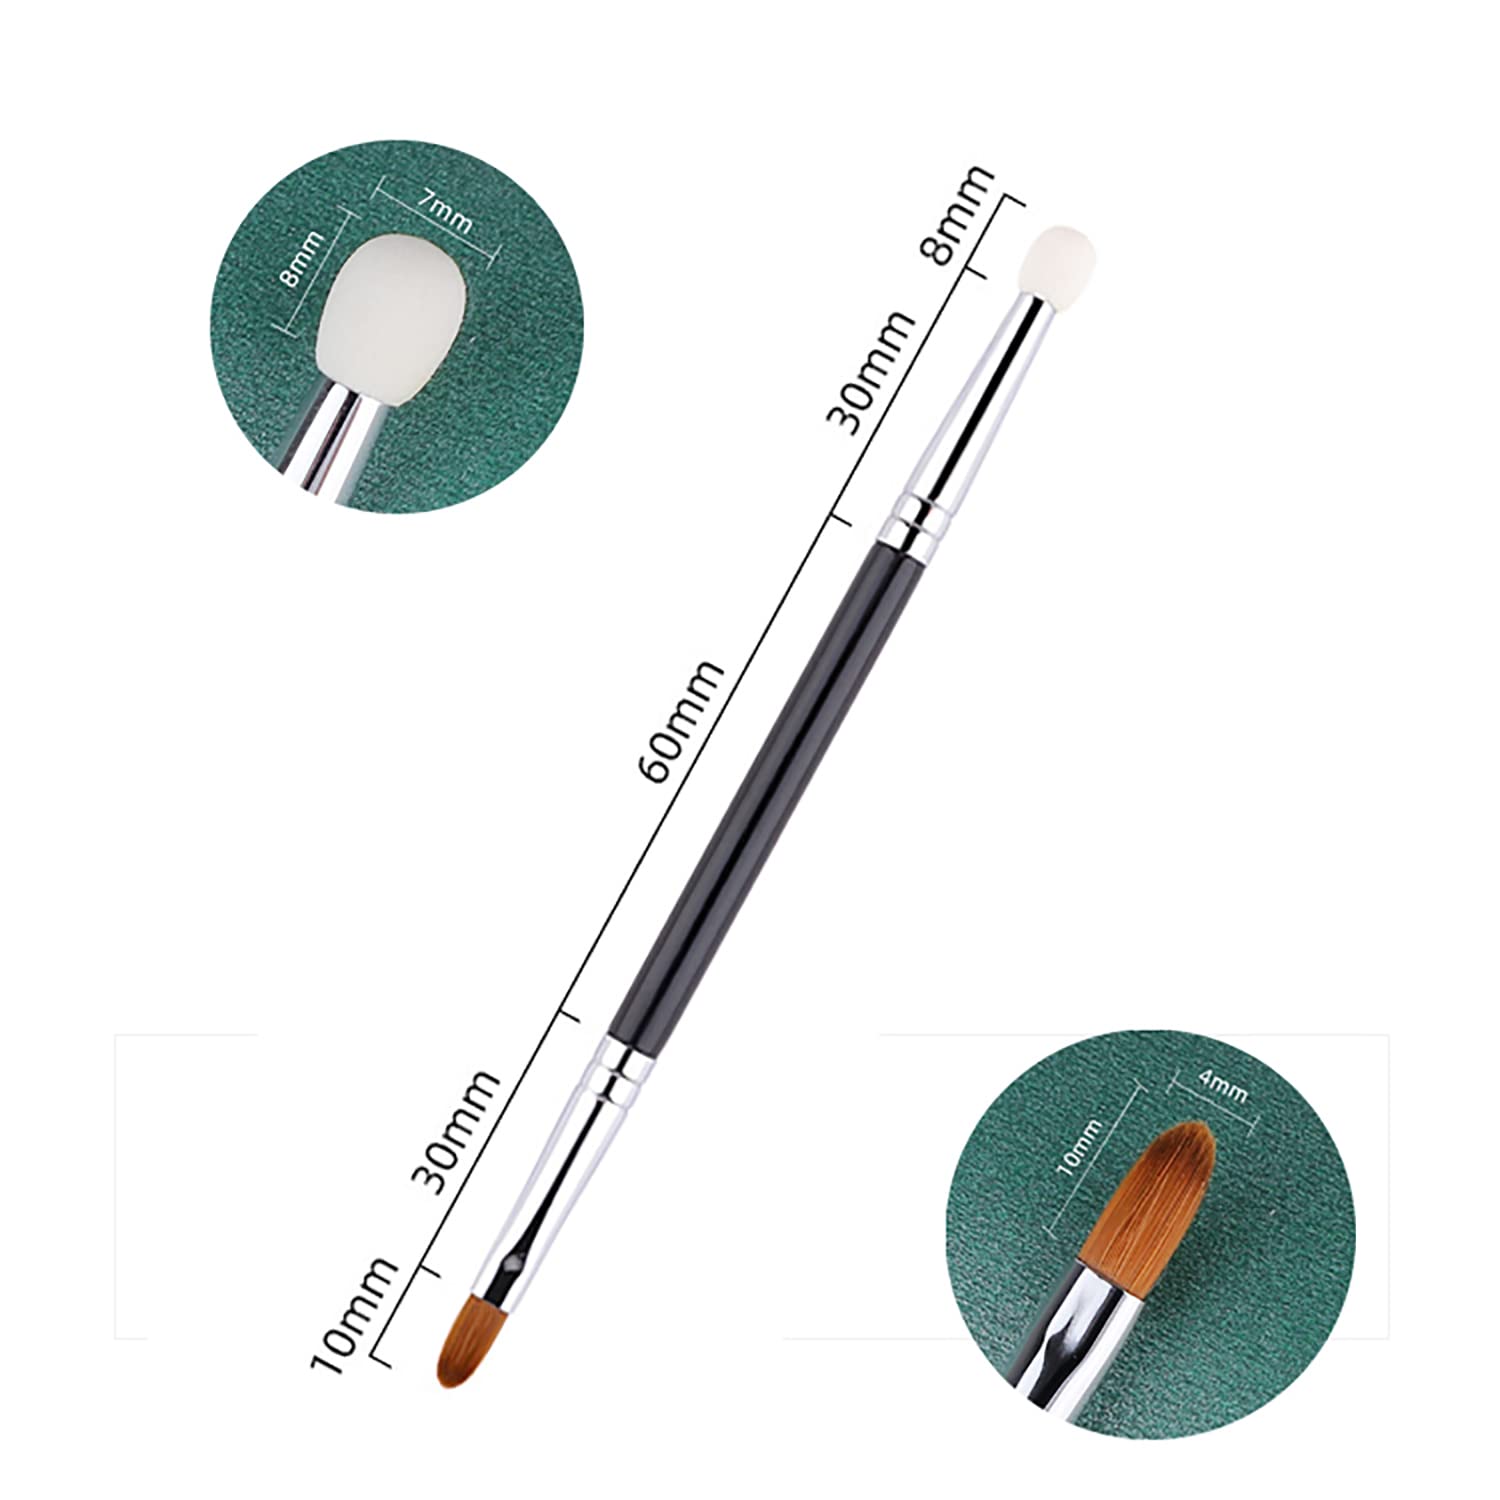 T301Makeup Brushes Dual Ended Flat Concealer Brush with Makeup Sponge For Dark Circles Puffiness Puffy Eyes Liquid Foundation Blending